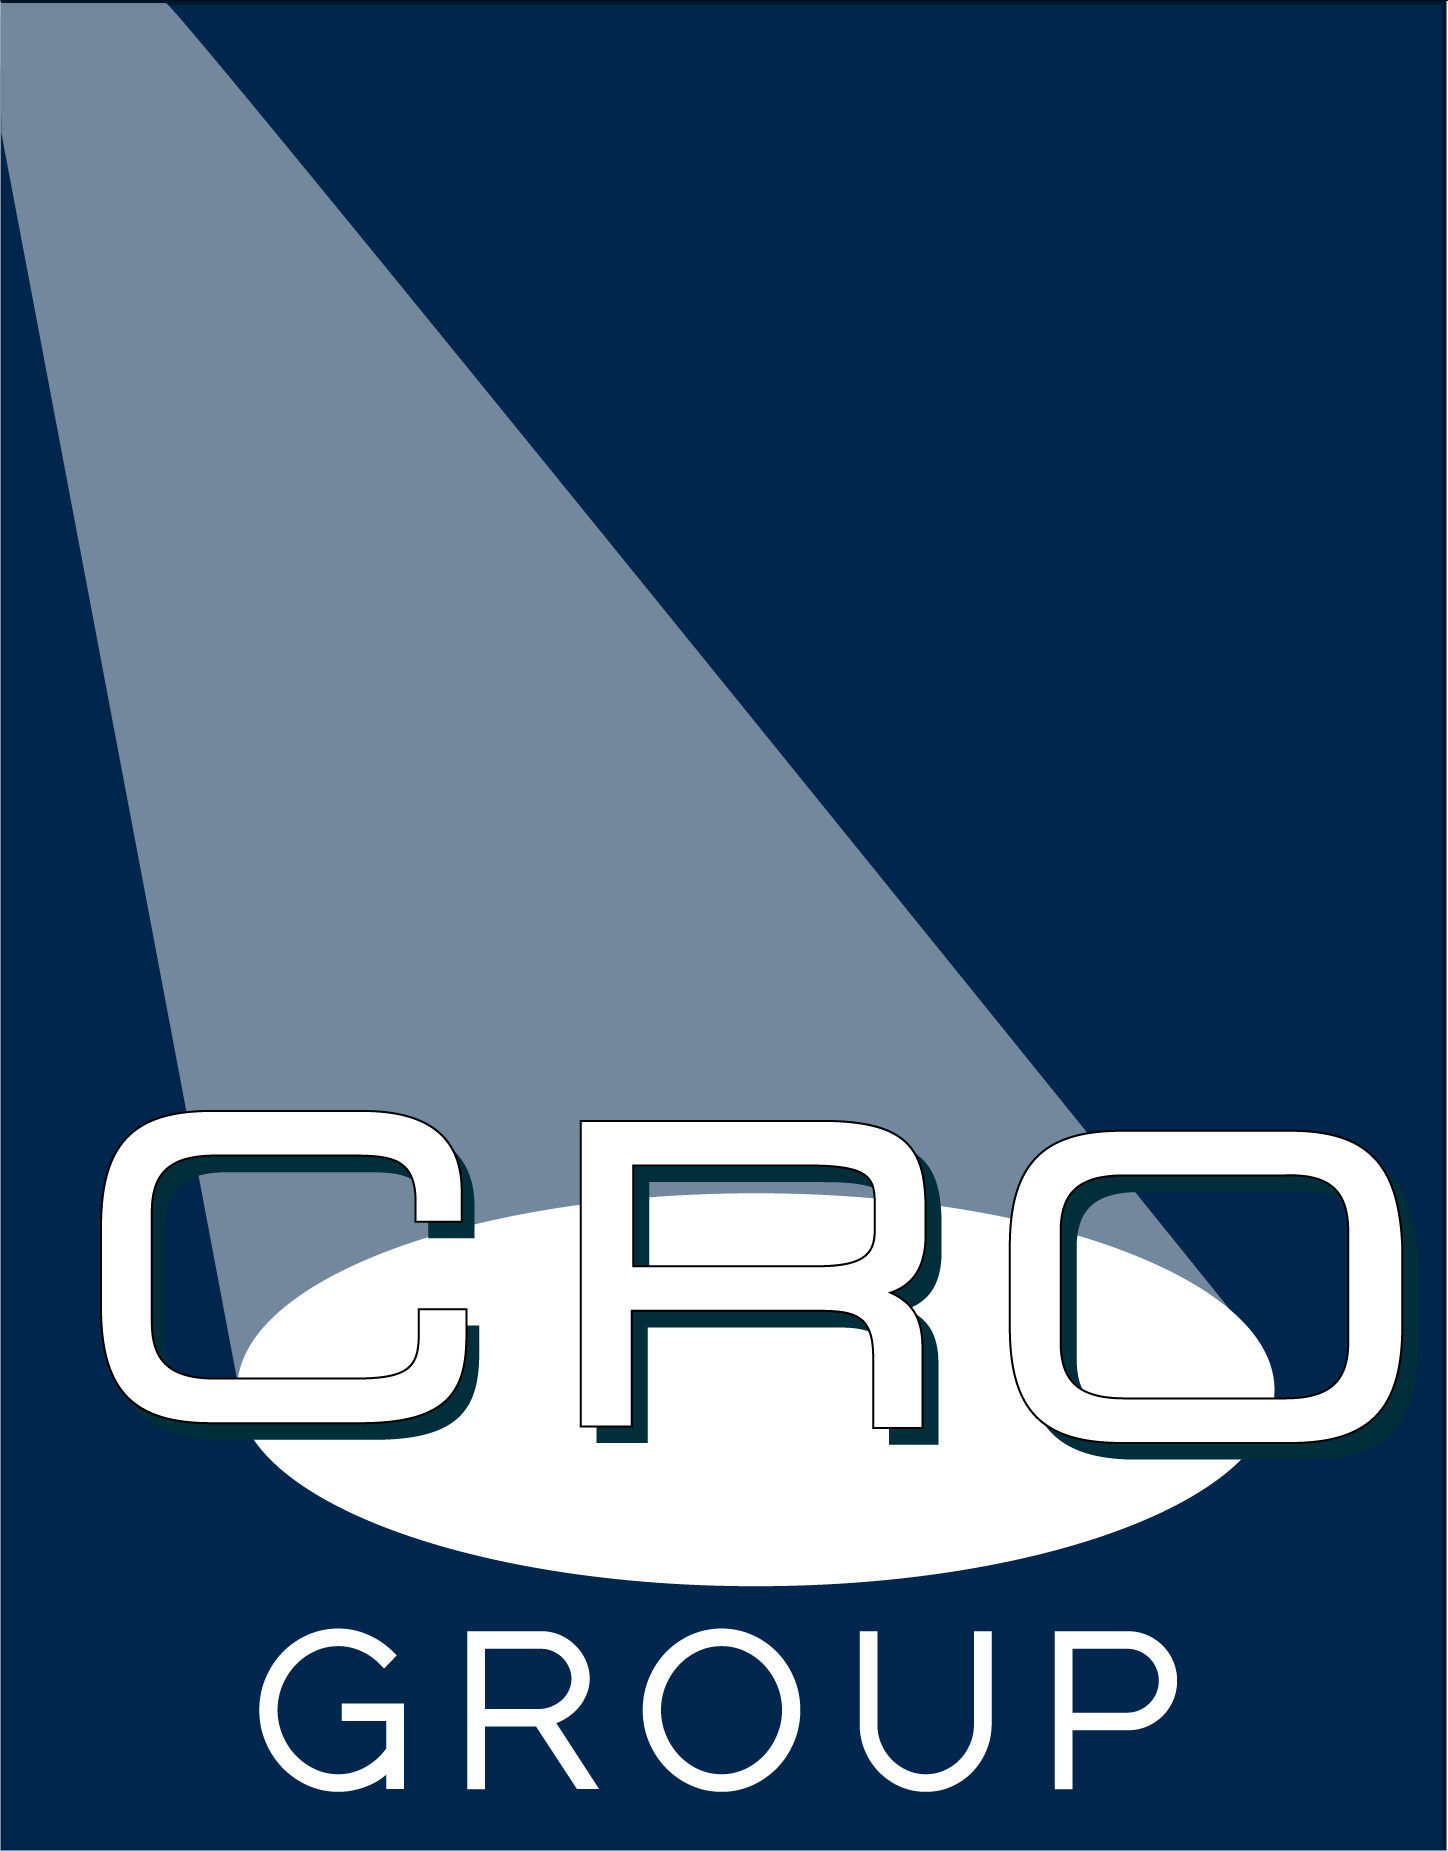 The CRO Group